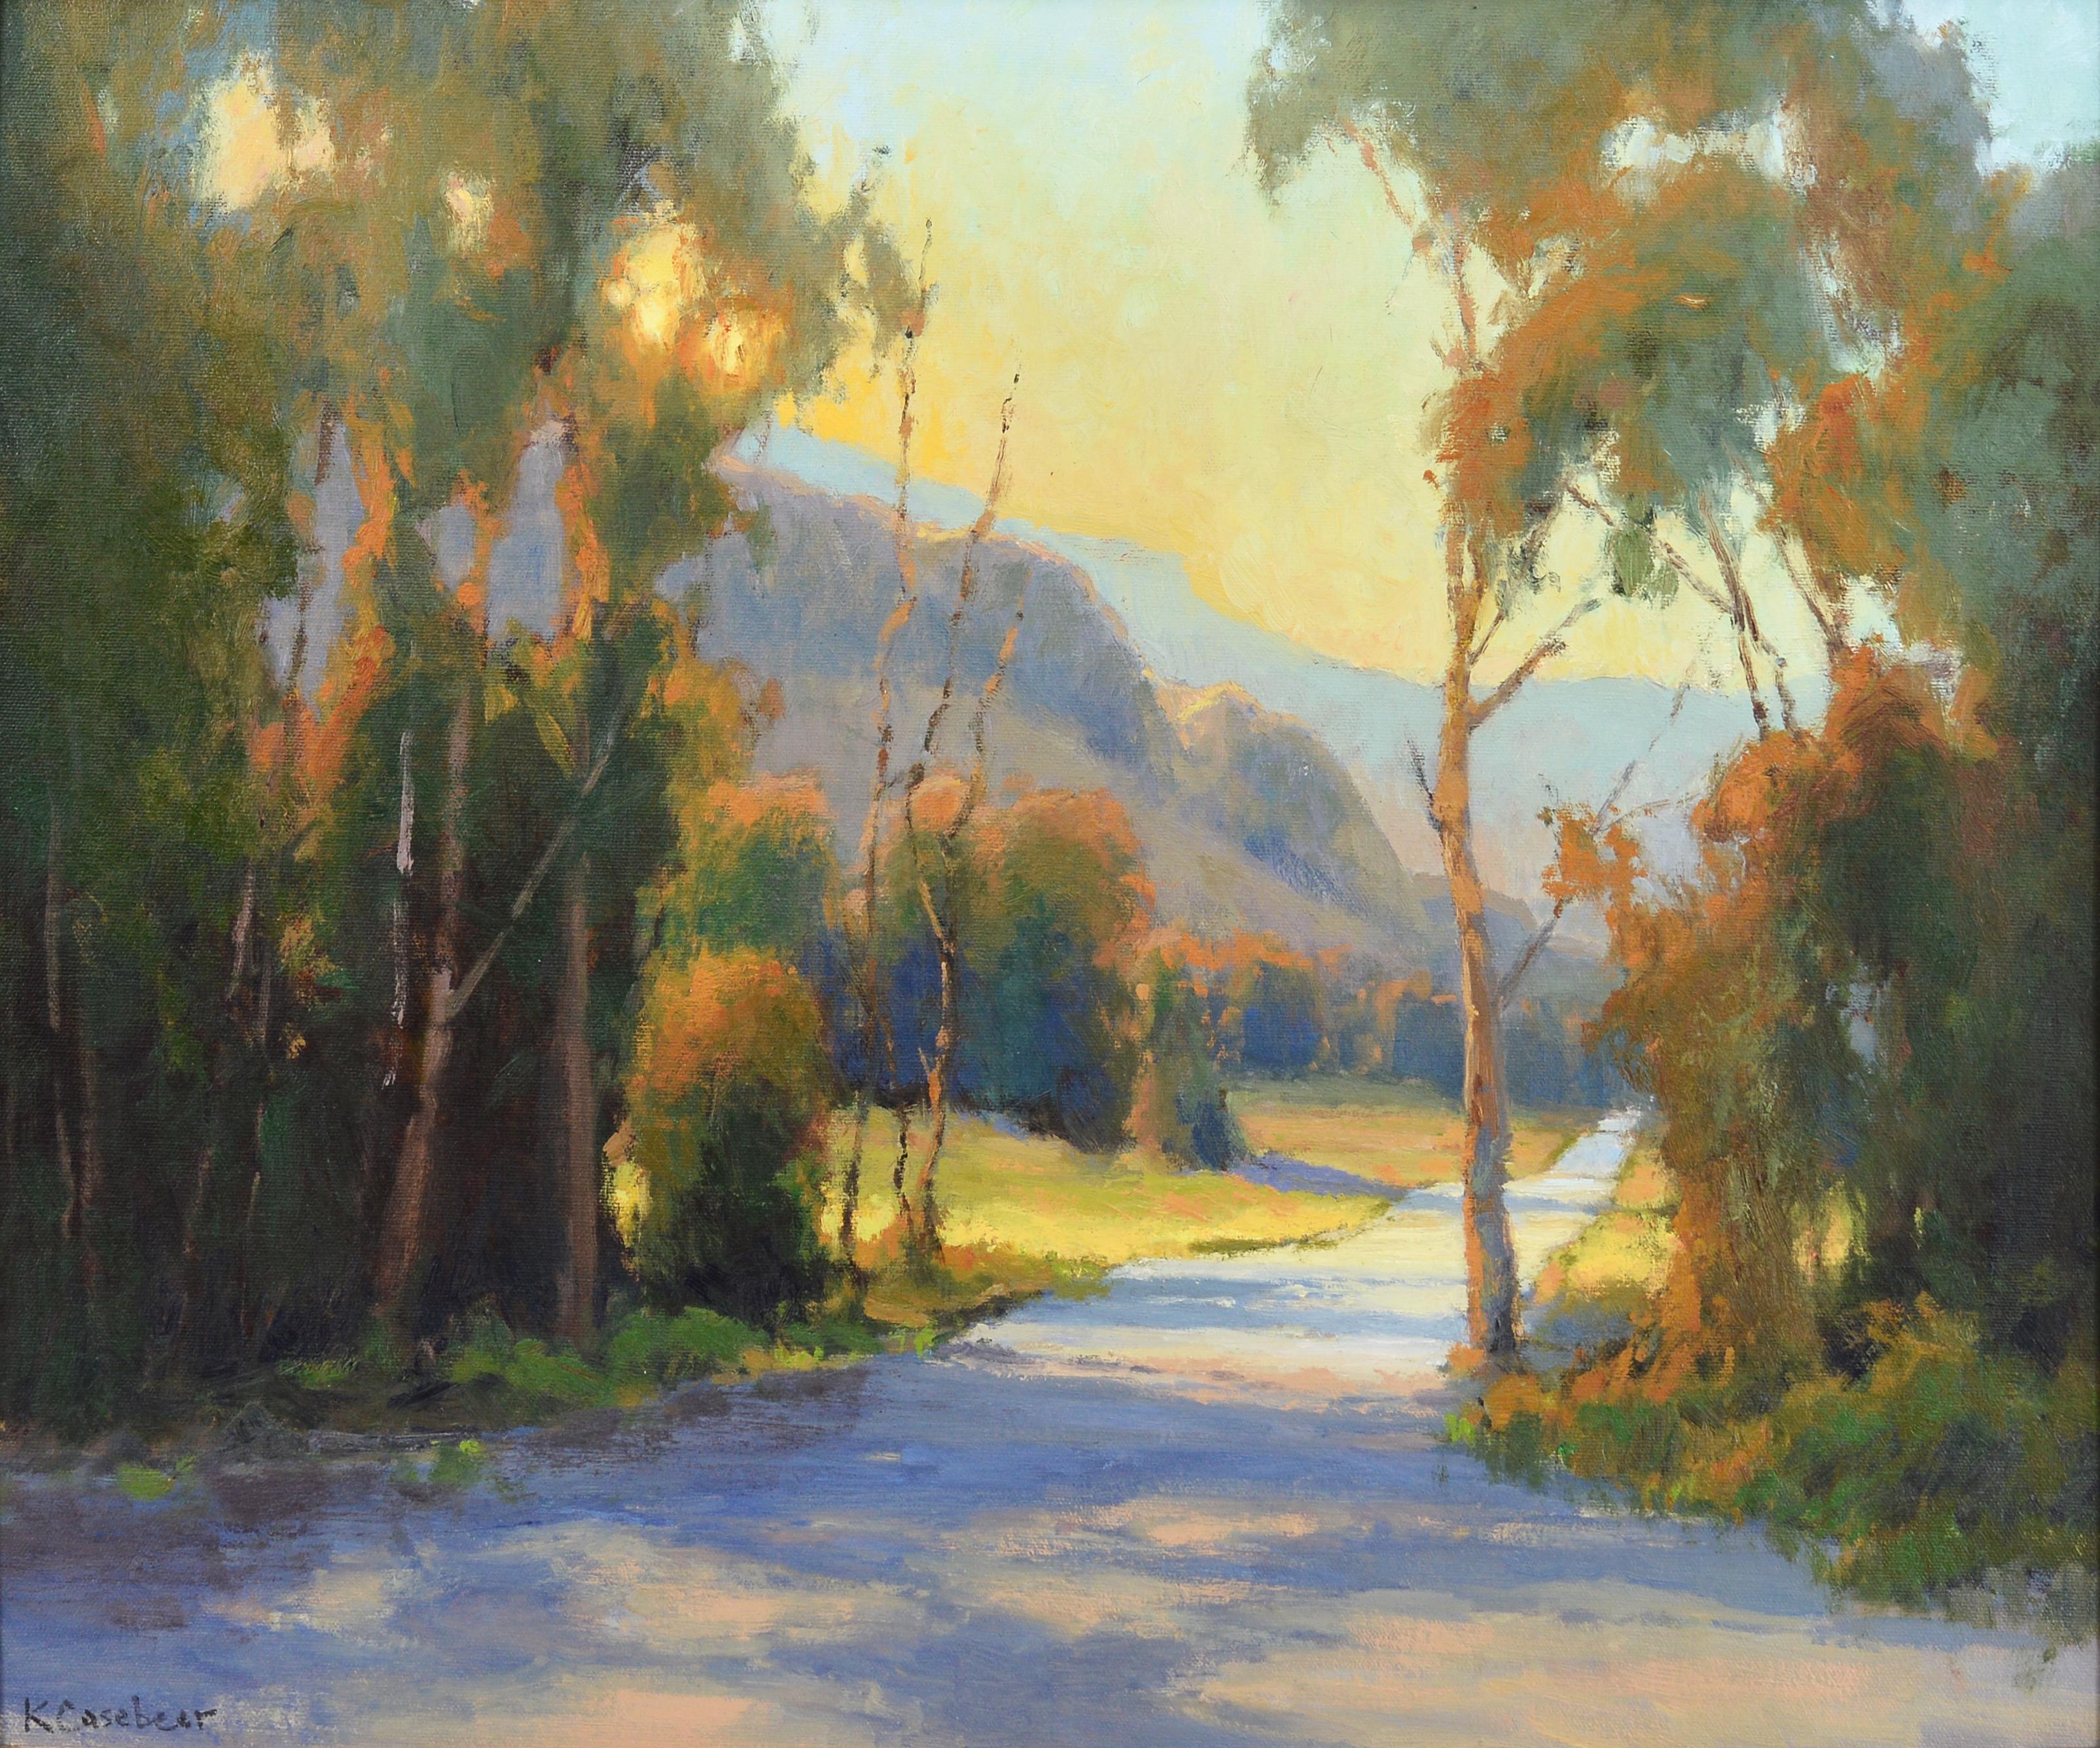 The Golden Hour - Painting by Kim Casebeer